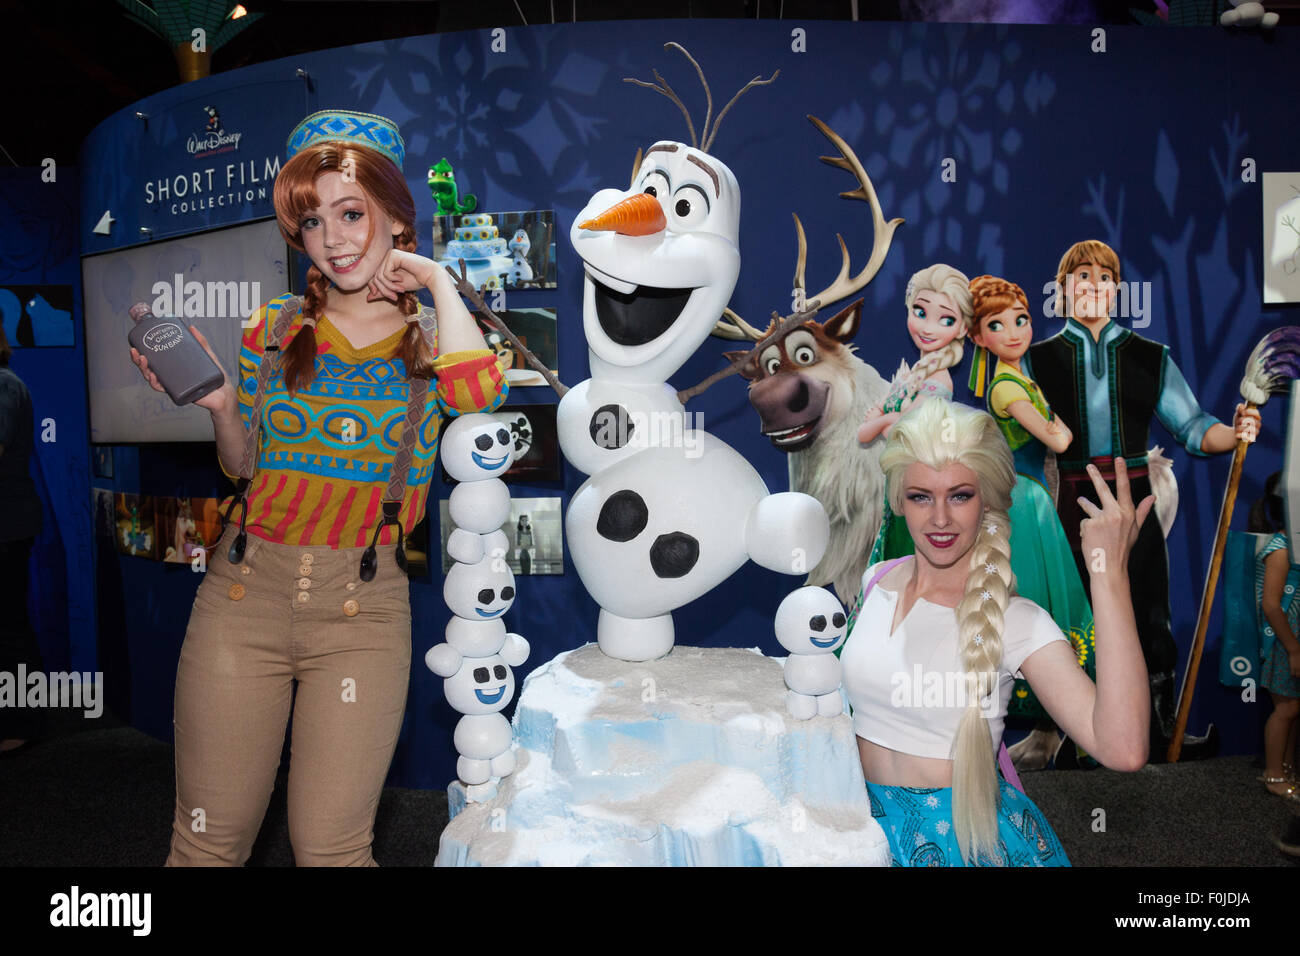 Anaheim, California, USA. 15th Aug, 2015. Jessica Chancellor as Anna in an  Oaken costume and Shel Sligar as Elsa from 'Frozen' posing with an Olaf  figure at the Disney D23 Expo in